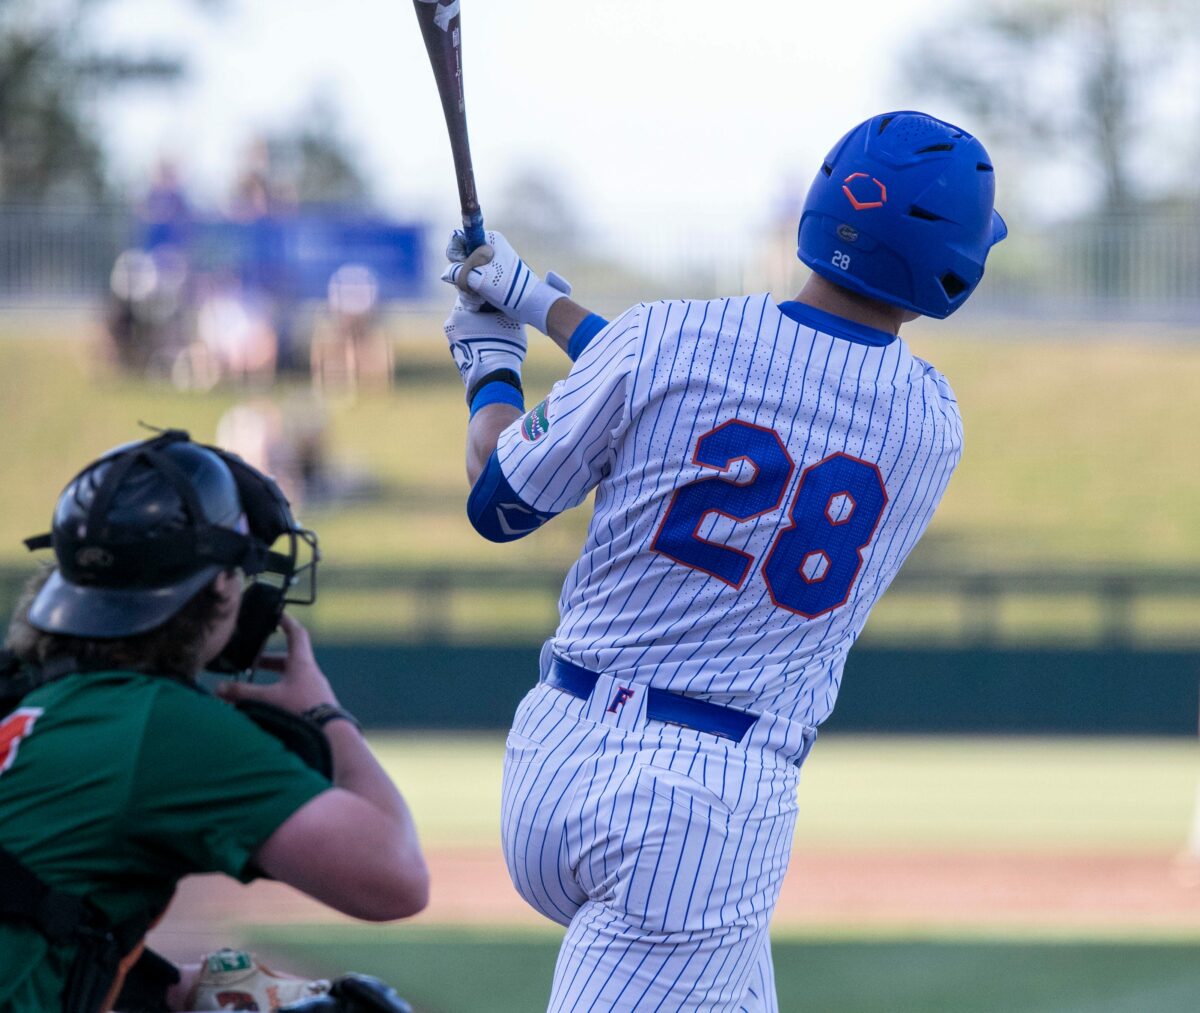 PHOTOS: Highlights from Florida baseball’s mercy rule win over FAMU Rattlers